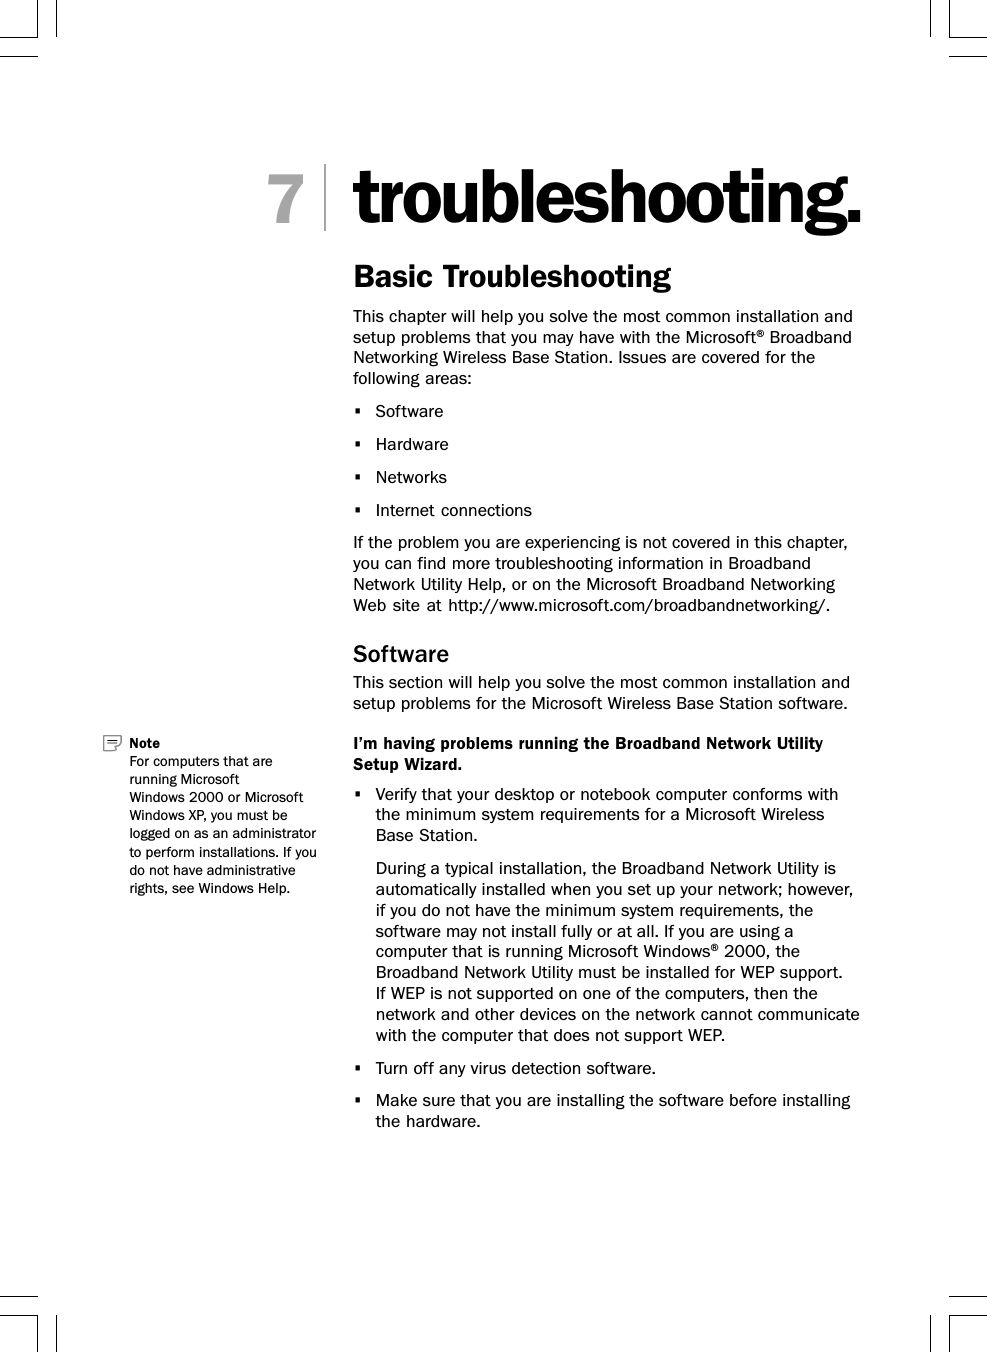 troubleshooting.Basic TroubleshootingThis chapter will help you solve the most common installation andsetup problems that you may have with the Microsoft® BroadbandNetworking Wireless Base Station. Issues are covered for thefollowing areas:•Software•Hardware•Networks•Internet connectionsIf the problem you are experiencing is not covered in this chapter,you can find more troubleshooting information in BroadbandNetwork Utility Help, or on the Microsoft Broadband NetworkingWeb site at http://www.microsoft.com/broadbandnetworking/.SoftwareThis section will help you solve the most common installation andsetup problems for the Microsoft Wireless Base Station software.I’m having problems running the Broadband Network UtilitySetup Wizard.•Verify that your desktop or notebook computer conforms withthe minimum system requirements for a Microsoft WirelessBase Station.During a typical installation, the Broadband Network Utility isautomatically installed when you set up your network; however,if you do not have the minimum system requirements, thesoftware may not install fully or at all. If you are using acomputer that is running Microsoft Windows® 2000, theBroadband Network Utility must be installed for WEP support.If WEP is not supported on one of the computers, then thenetwork and other devices on the network cannot communicatewith the computer that does not support WEP.•Turn off any virus detection software.•Make sure that you are installing the software before installingthe hardware.7Note   For computers that arerunning MicrosoftWindows 2000 or MicrosoftWindows XP, you must belogged on as an administratorto perform installations. If youdo not have administrativerights, see Windows Help.